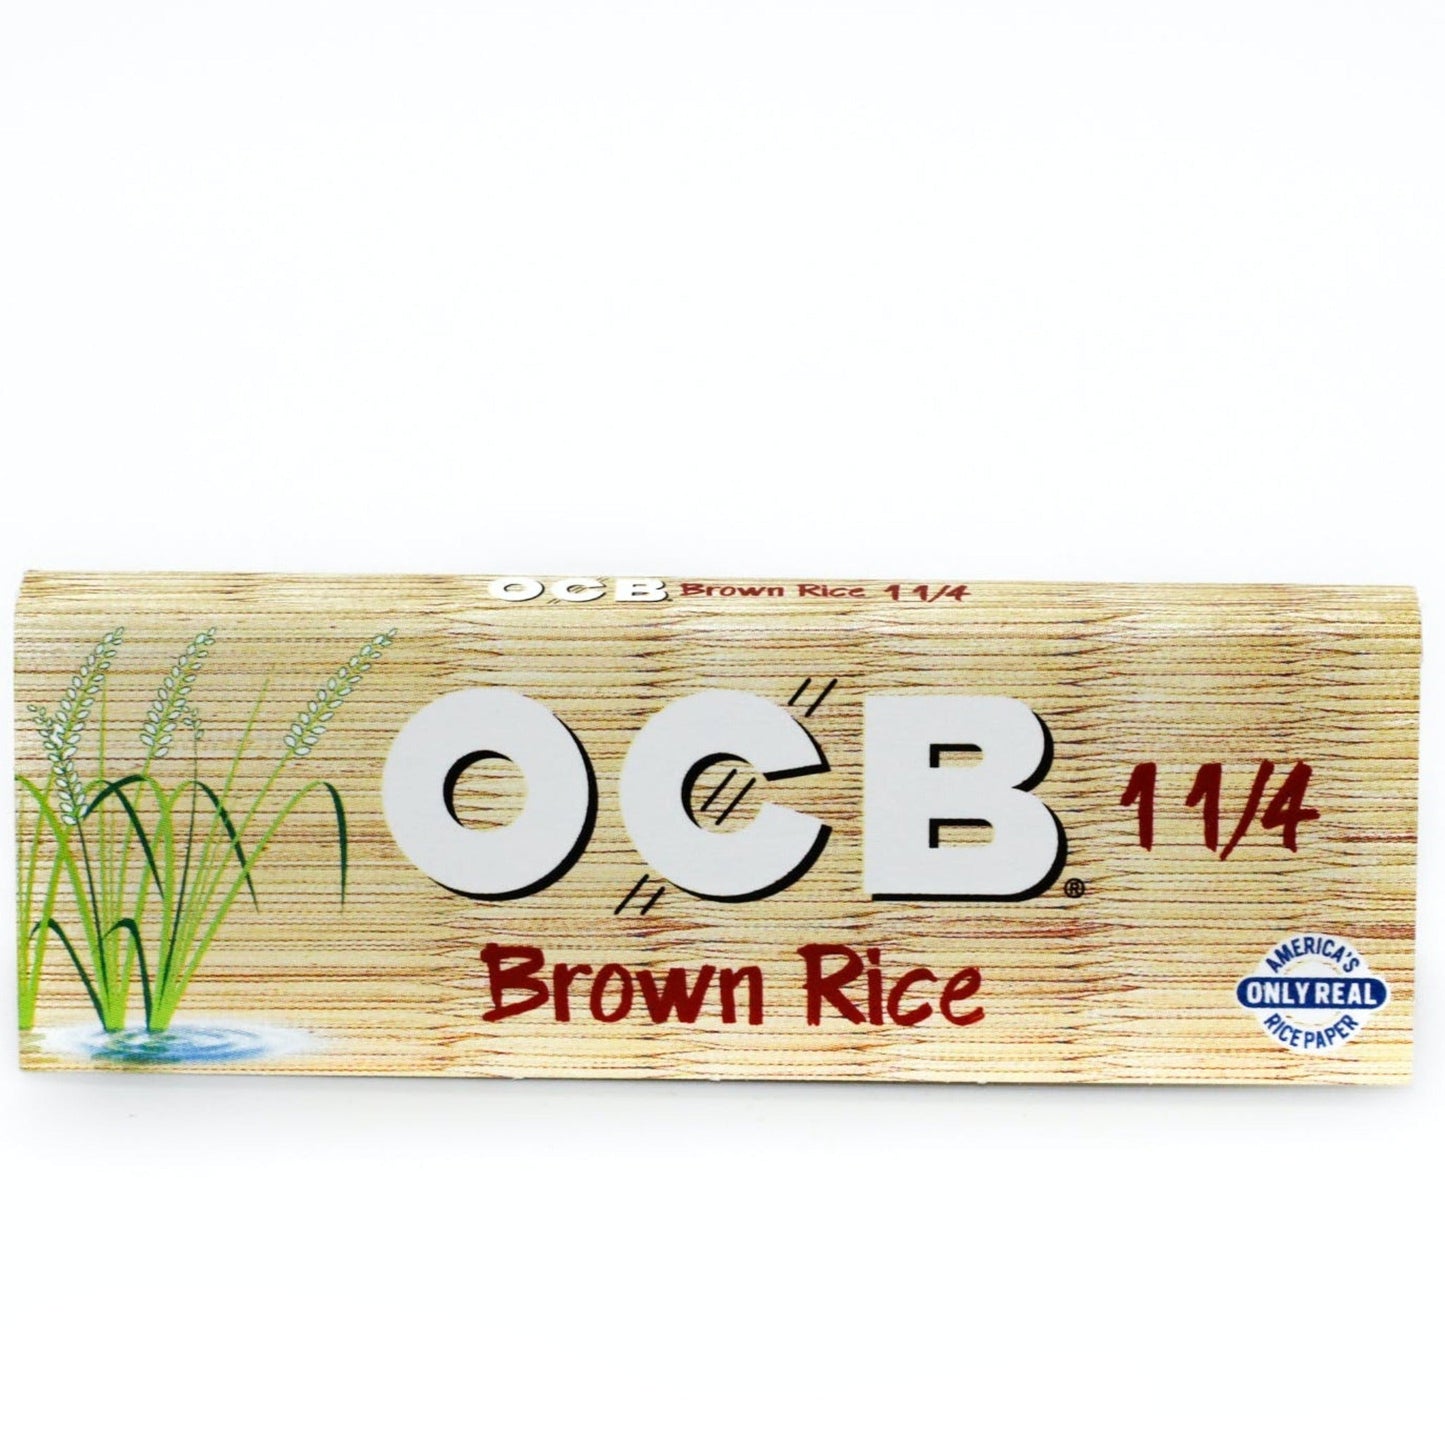 OCB Papers + Tips Brown Rice / 1 1/4